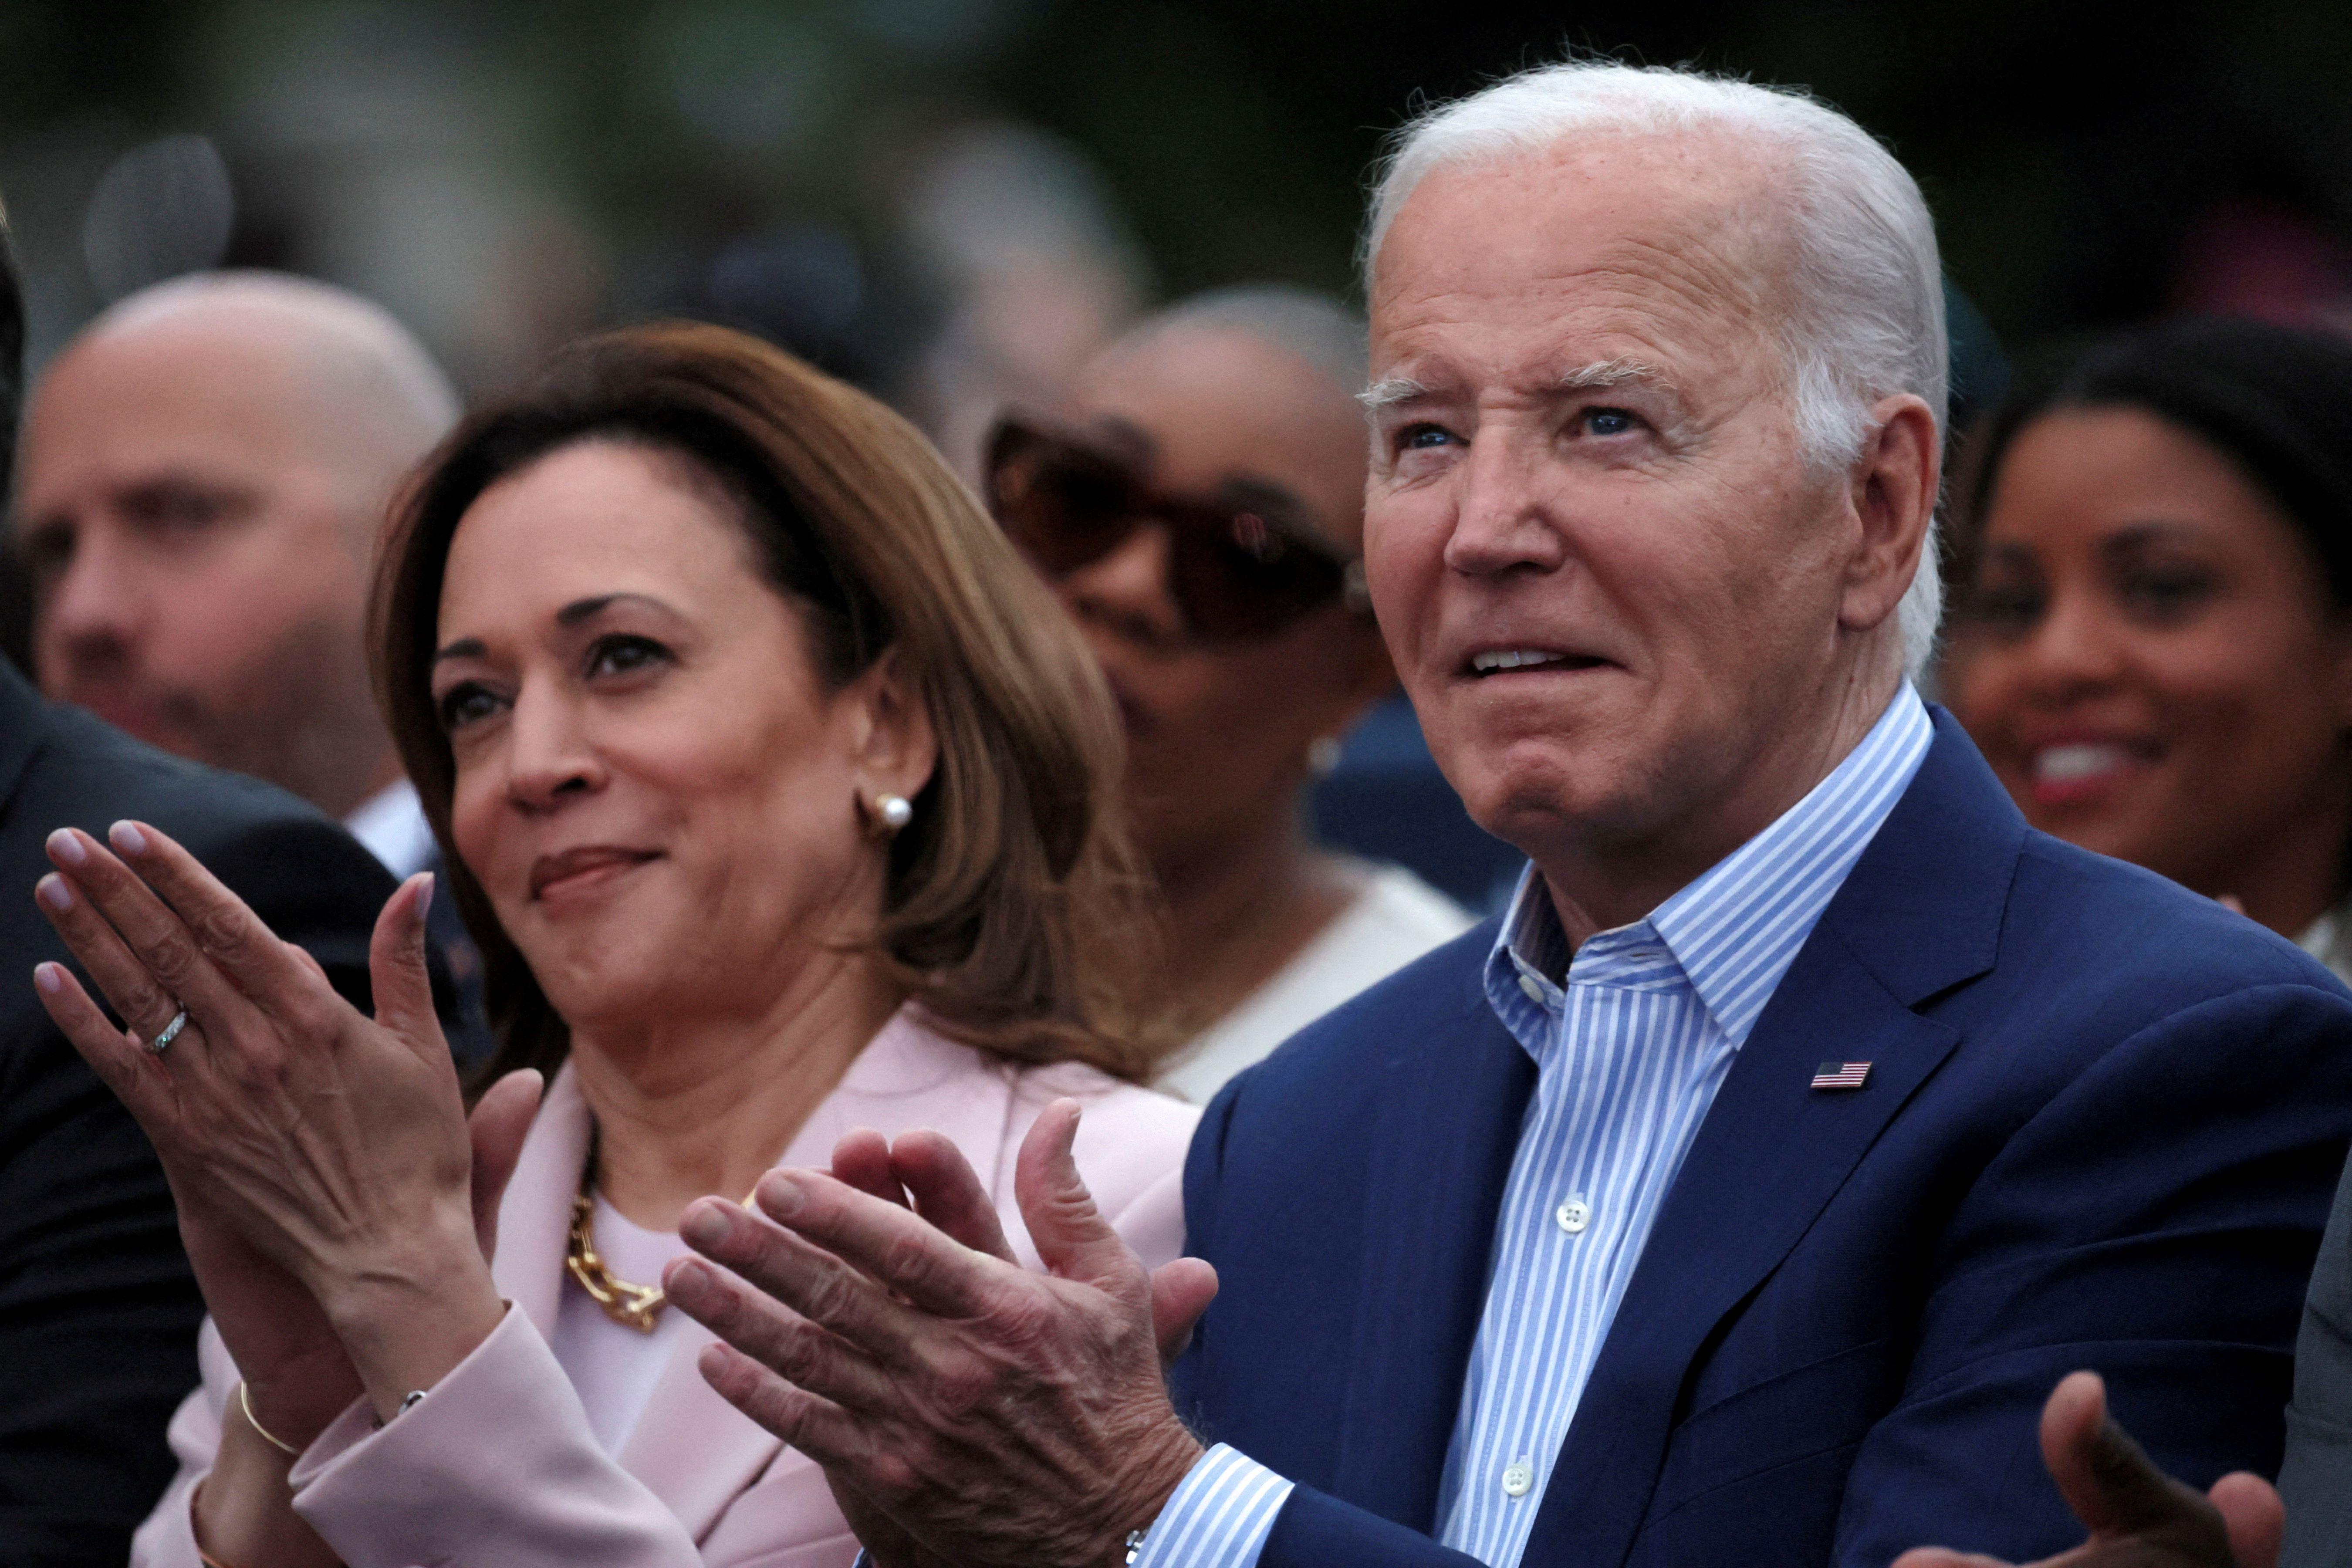 Biden tells staff leaving race was right thing to do